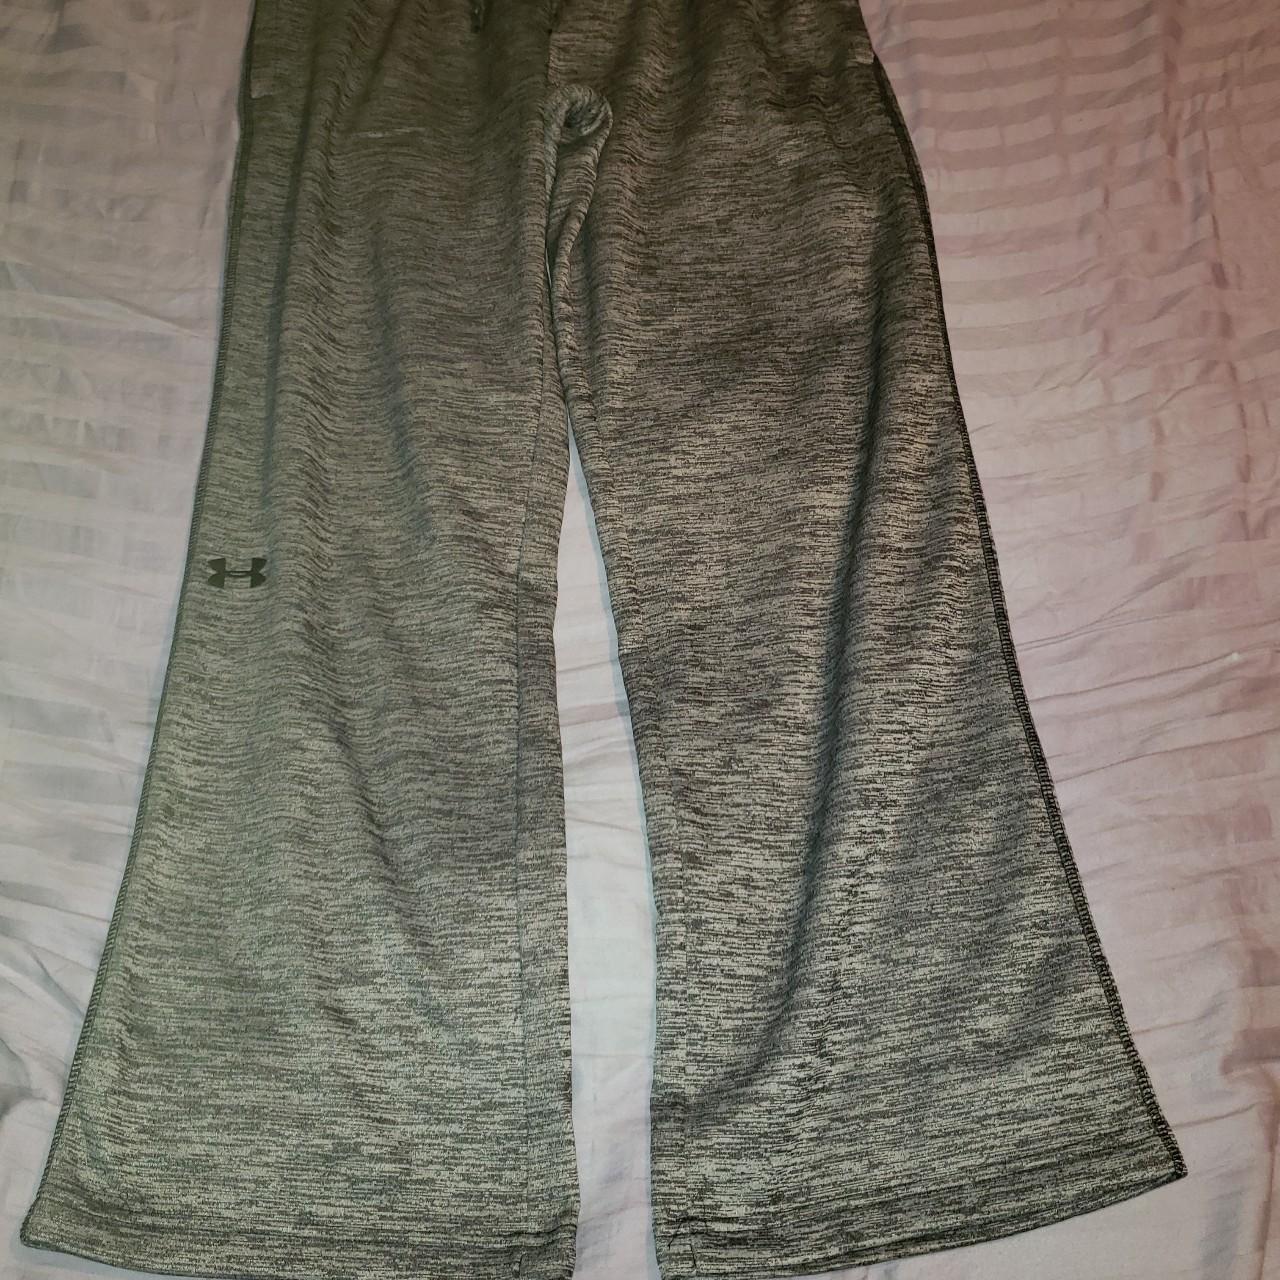 Under Armour Cold Gear Loose sweatpants, gray, size